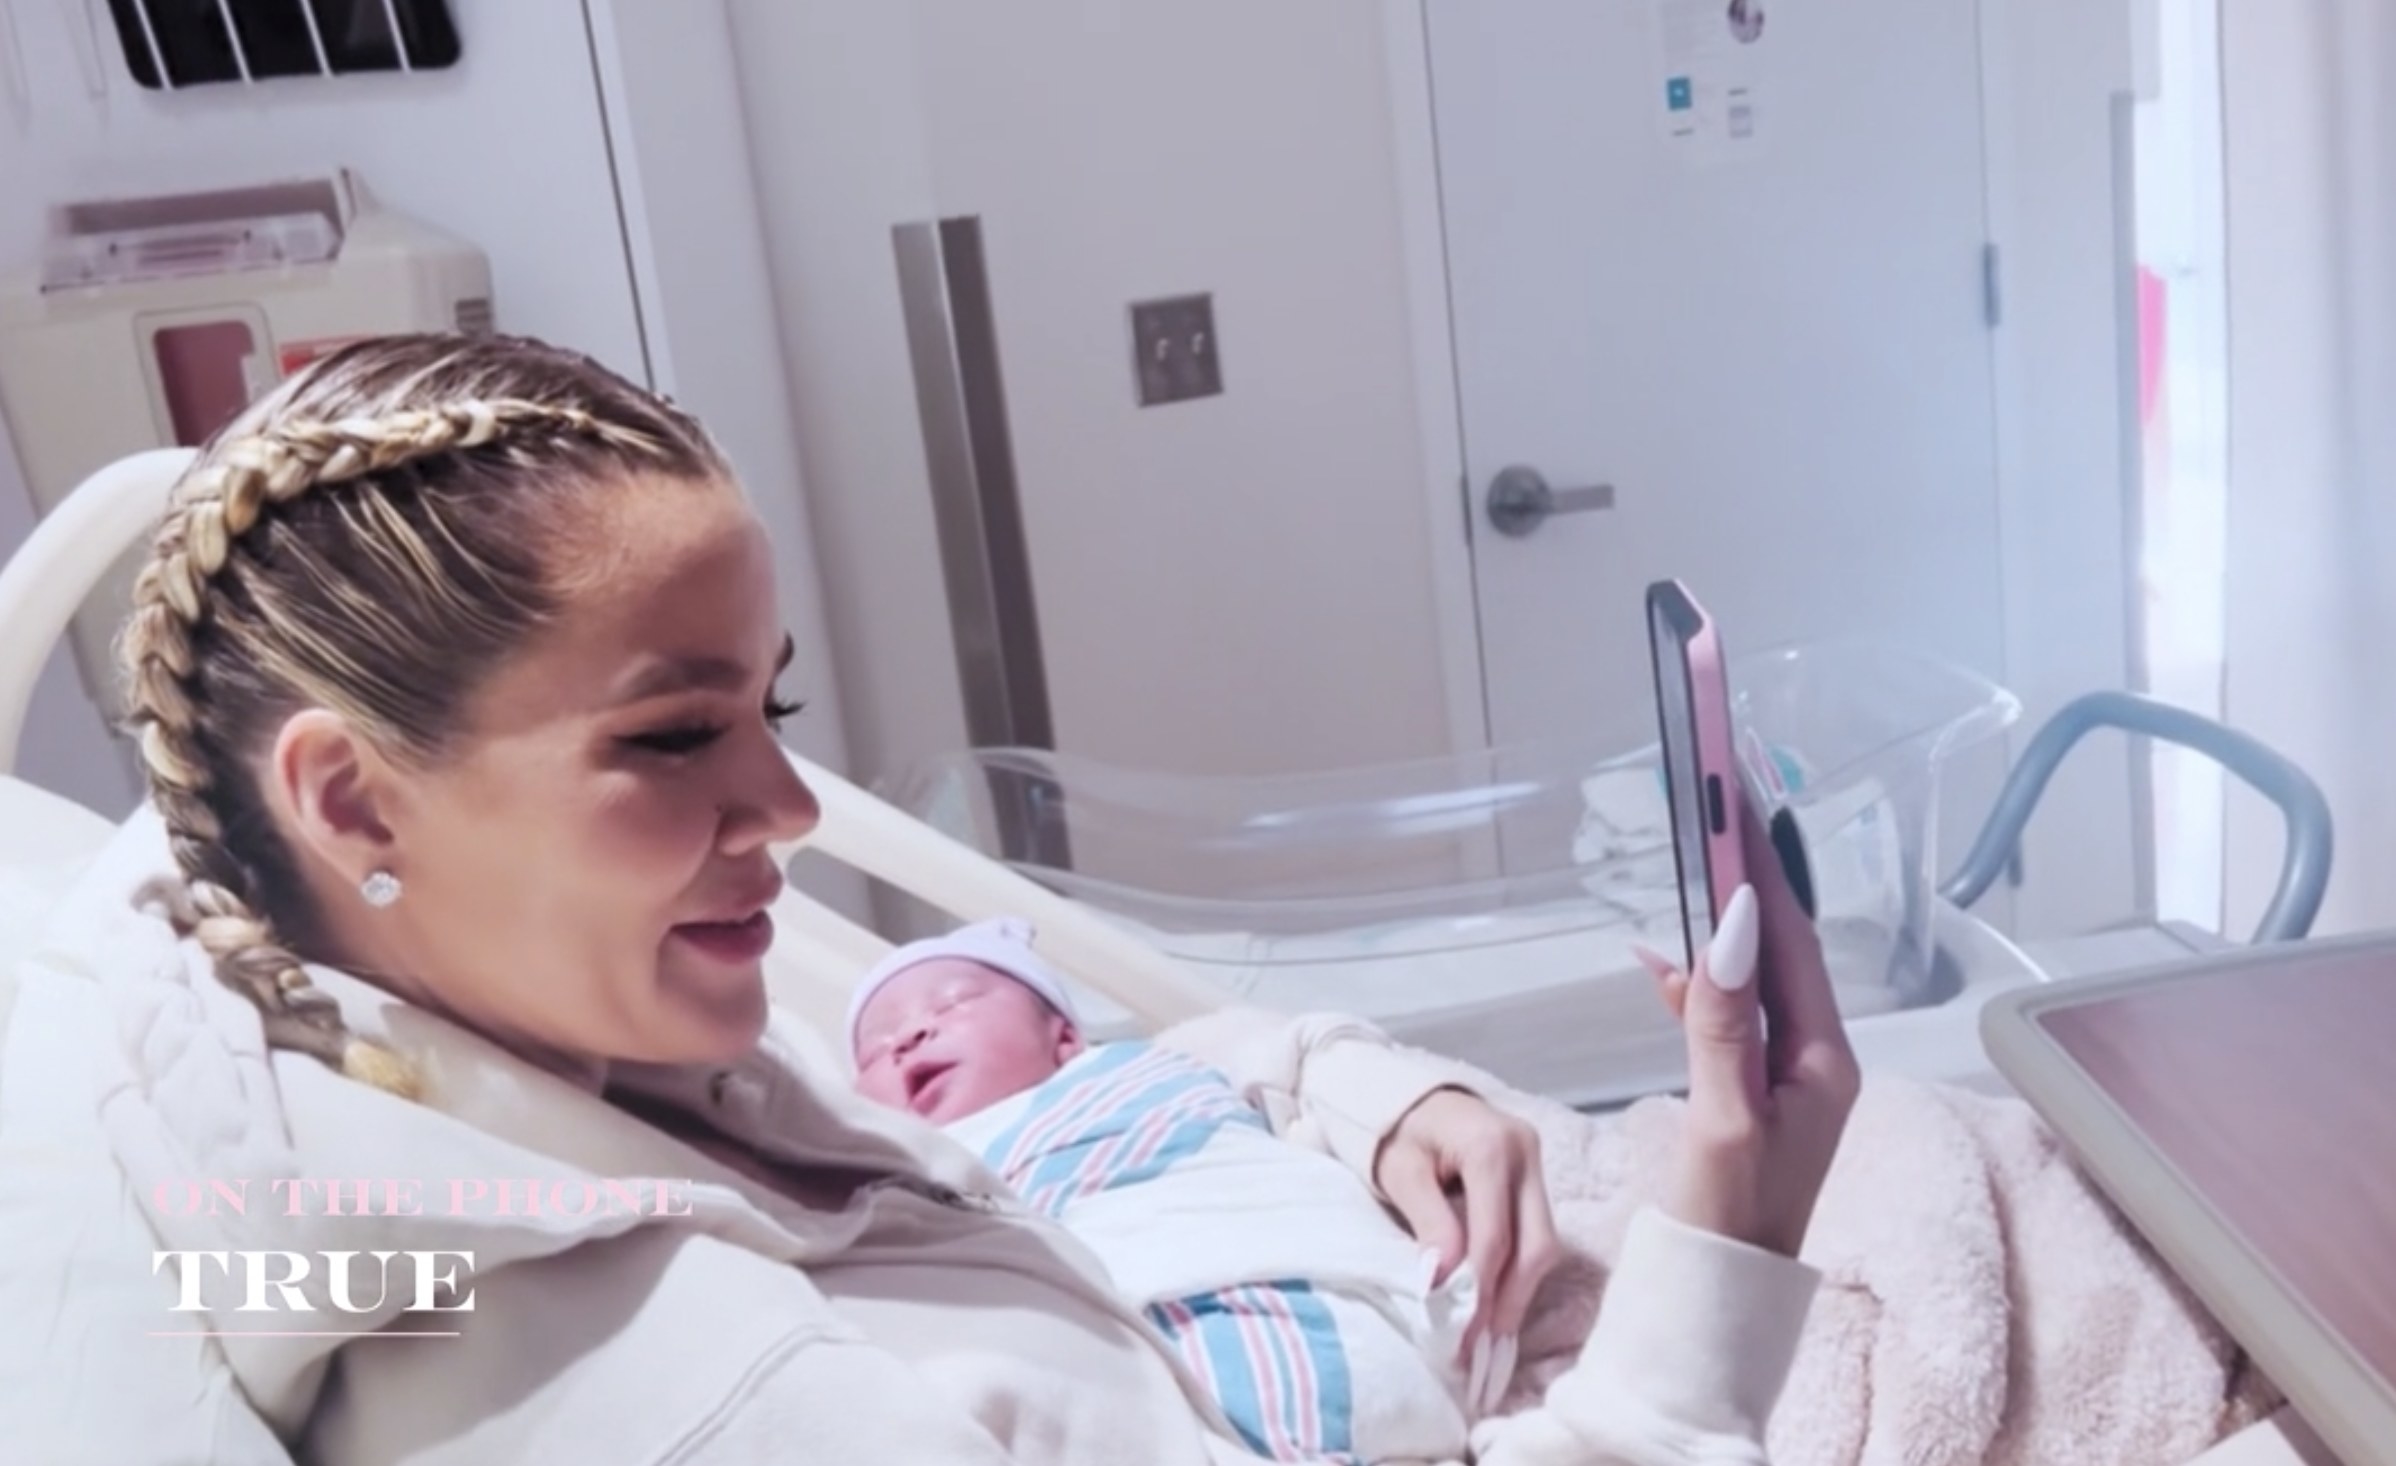 Khloe smiles while holding the baby and talking on Facetime to True